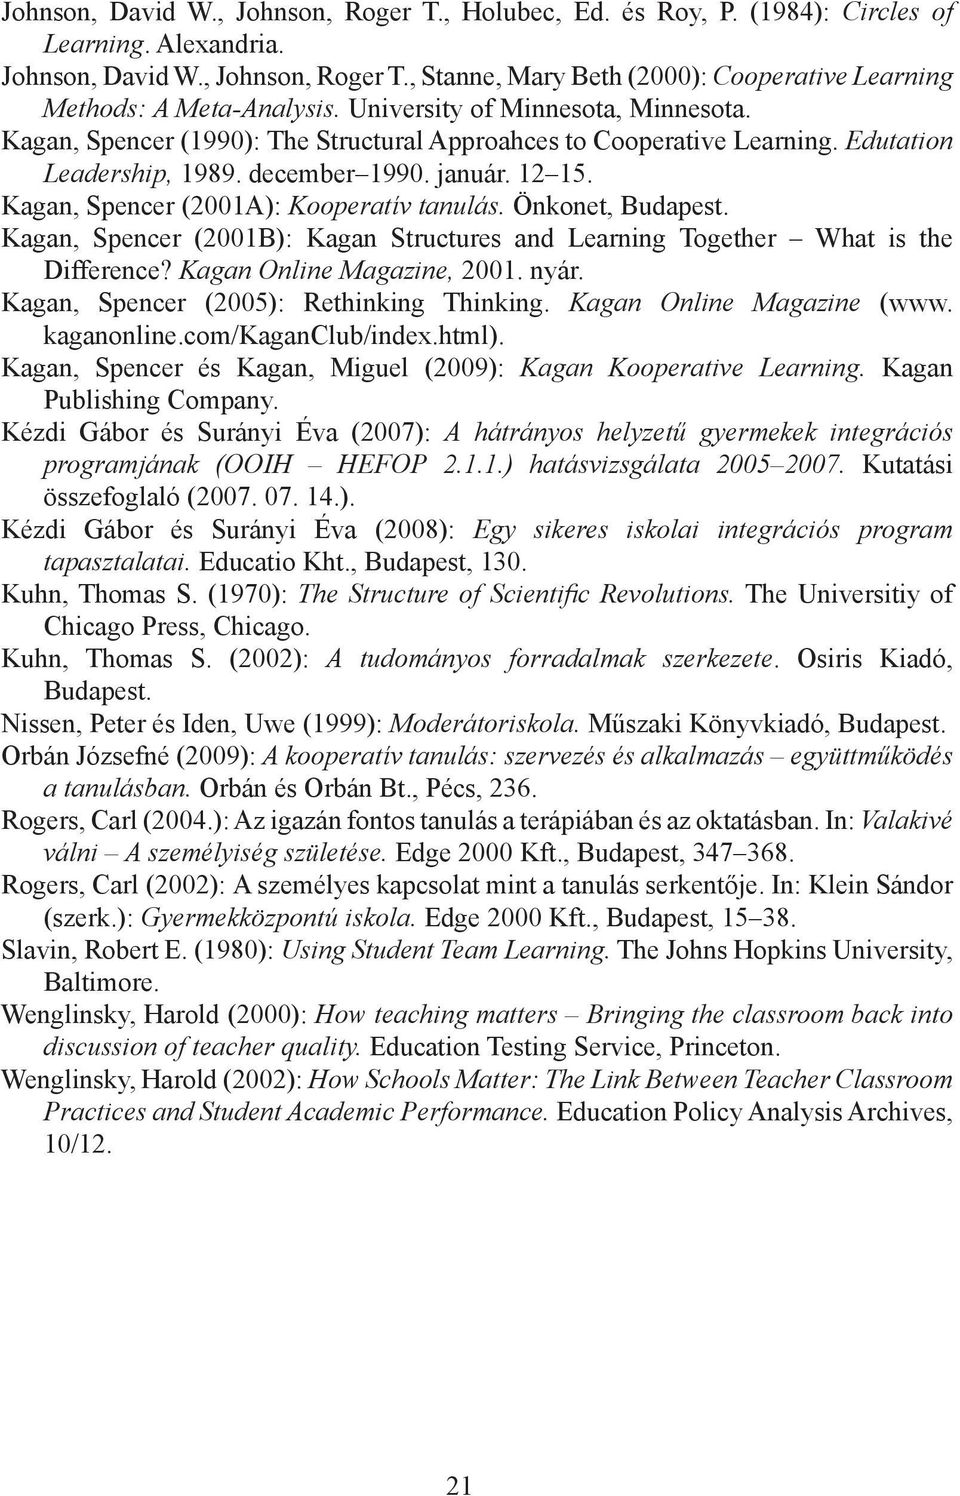 Kagan, Spencer (2001A): Kooperatív tanulás. Önkonet, Budapest. Kagan, Spencer (2001B): Kagan Structures and Learning Together What is the Difference? Kagan Online Magazine, 2001. nyár.